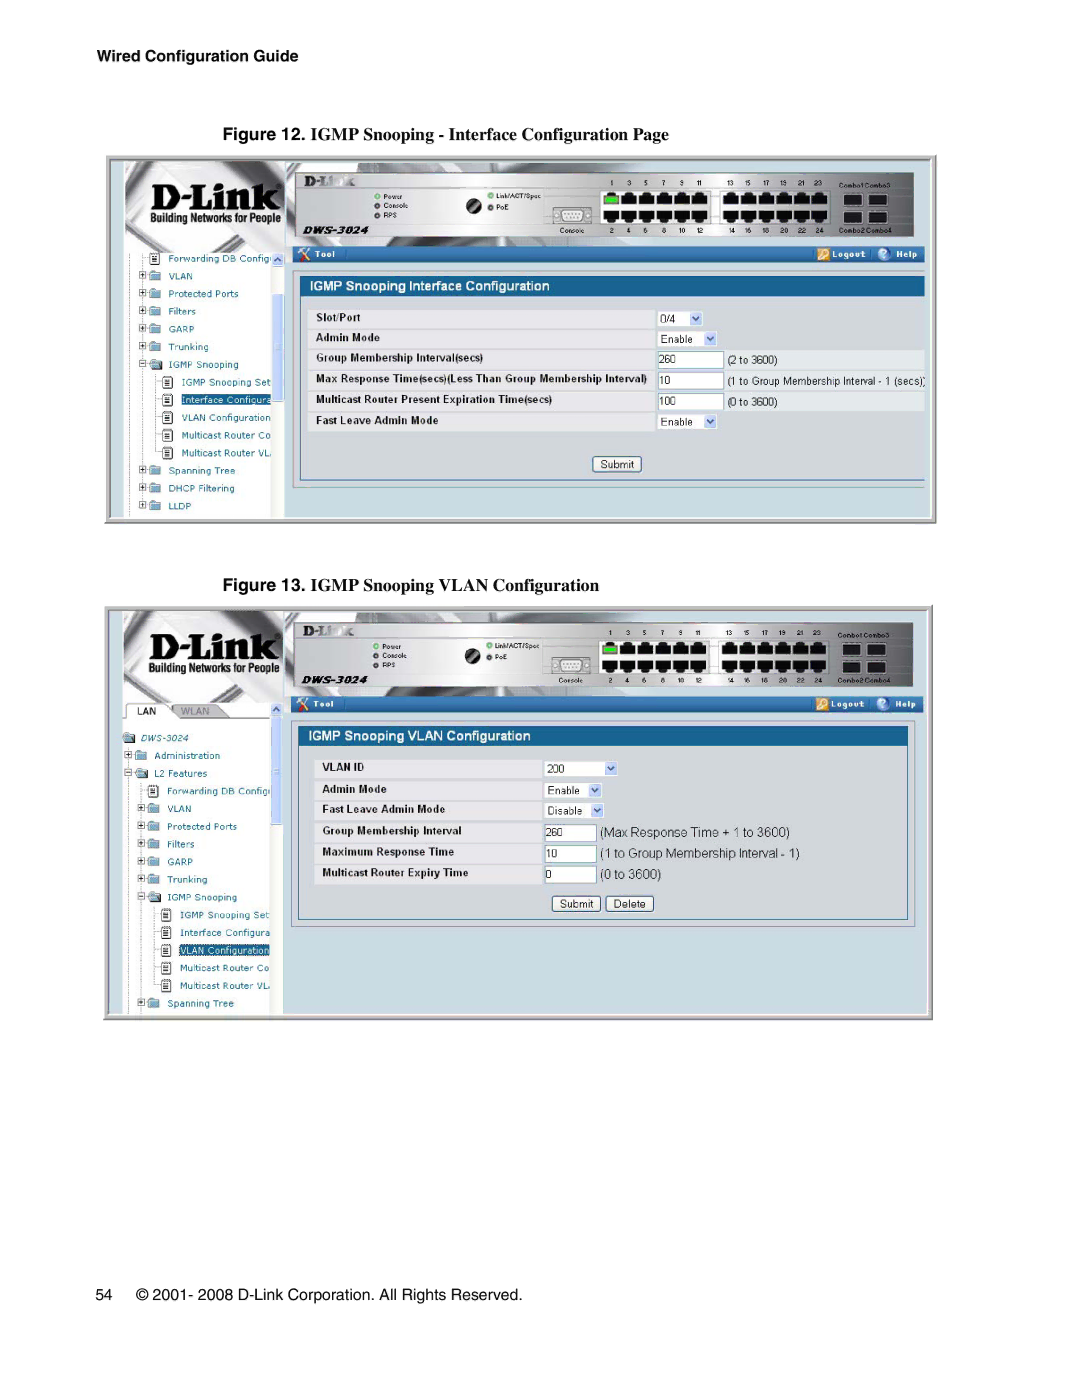 D-Link DWS-3000 manual Igmp Snooping Interface Configuration 